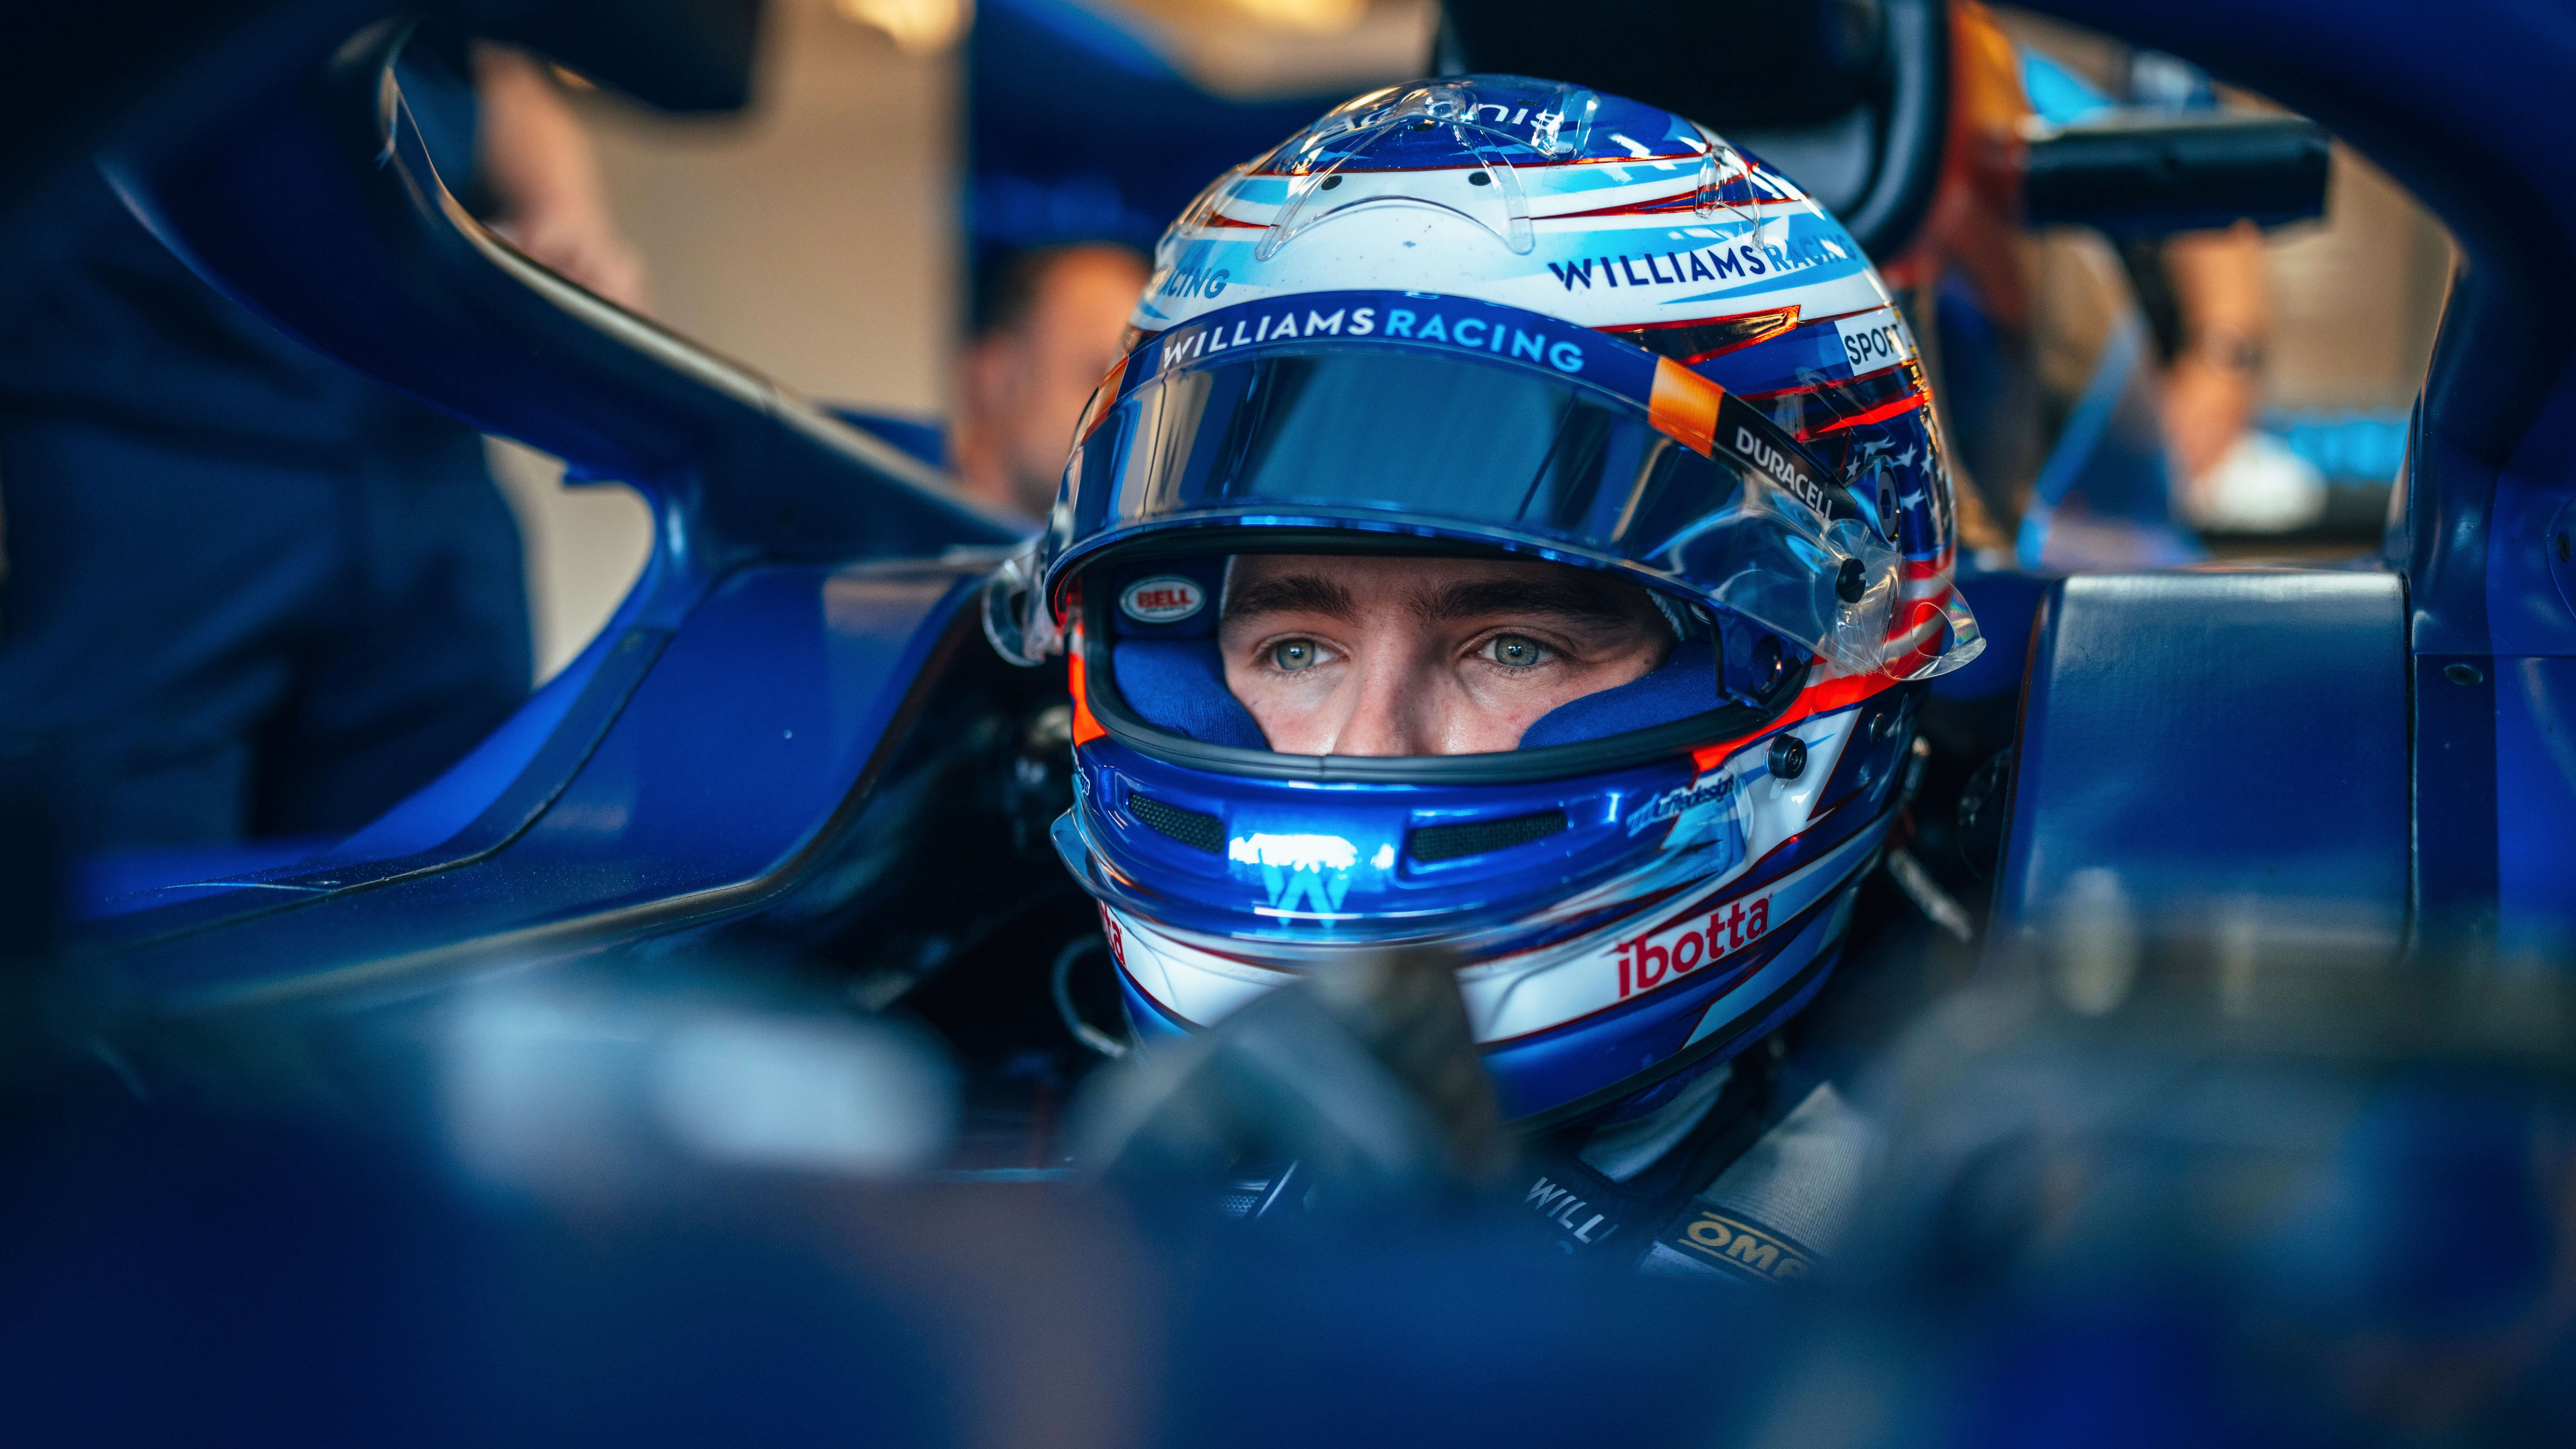 Americas Formula 1 star Who is Logan Sargeant? Williams Racing